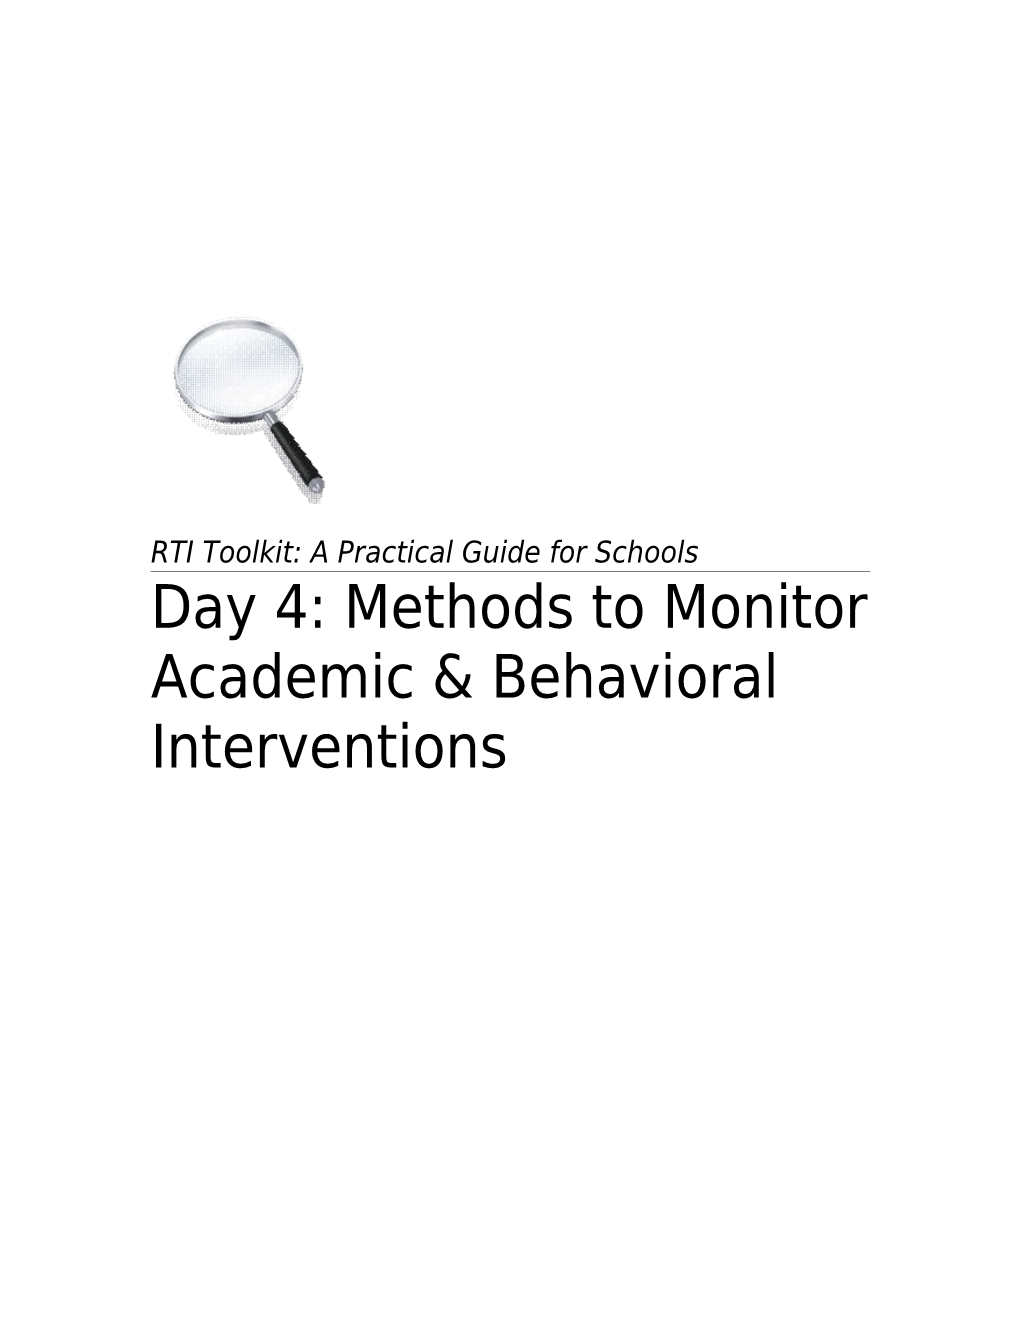 RTI Toolkit: a Practical Guide for Schools